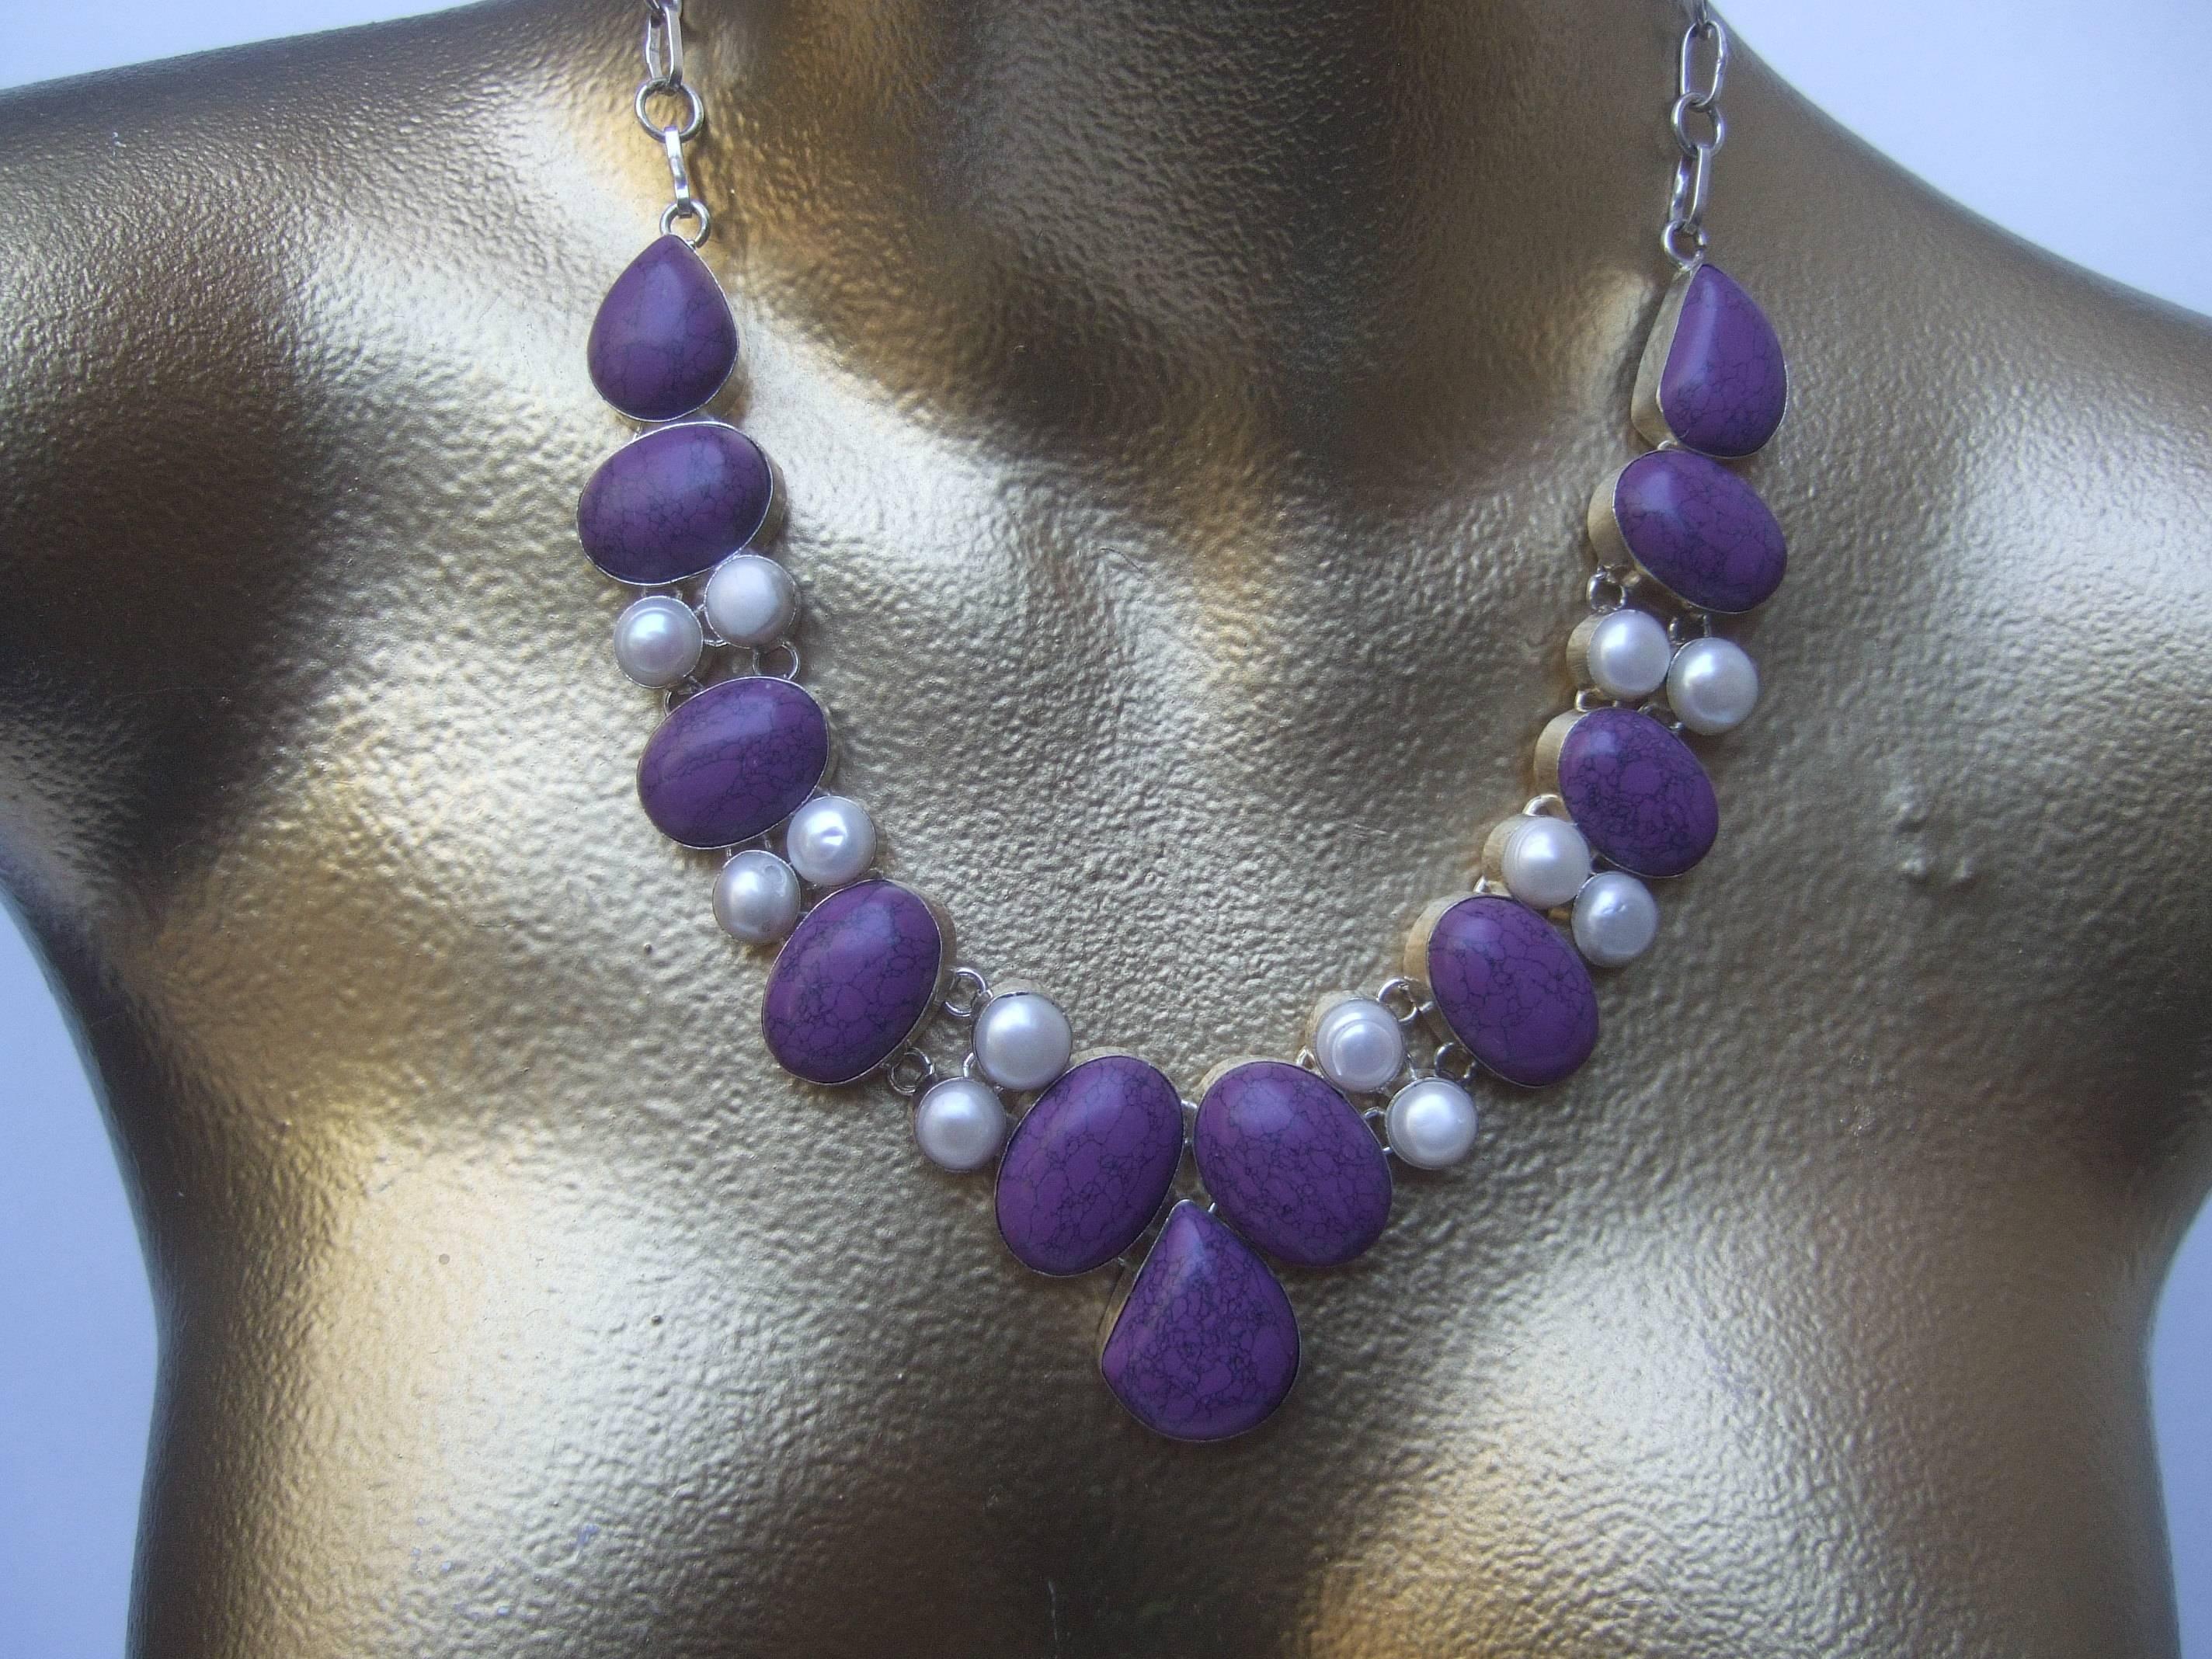 Sterling artisan purple stone and pearl statement necklace
The exotic necklace is designed with a collection of smooth
deep purple oval shaped stones set in sterling bezels

Interspersed within the purple stones are a series of smaller
circular